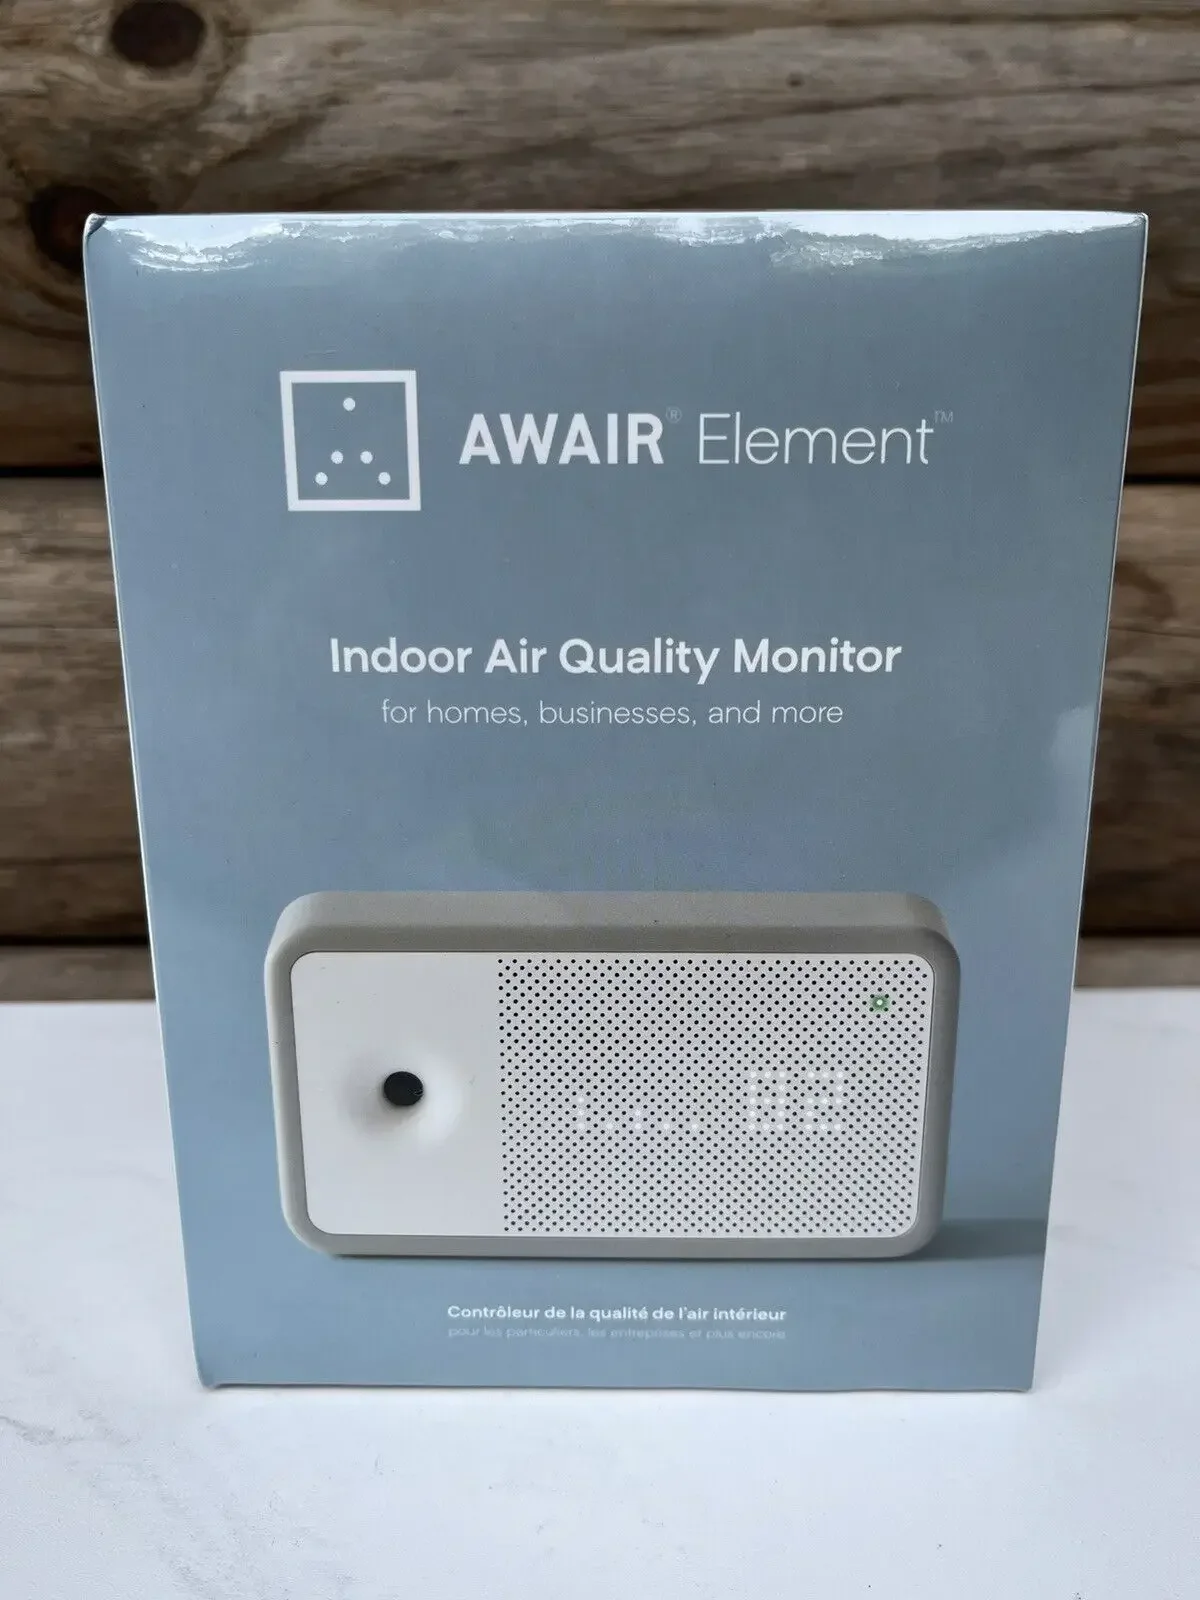 

SUMMER 50% DISCOUNT BUY 20 GET 10 FREE Awair Element Indoor Air Quality Monitor